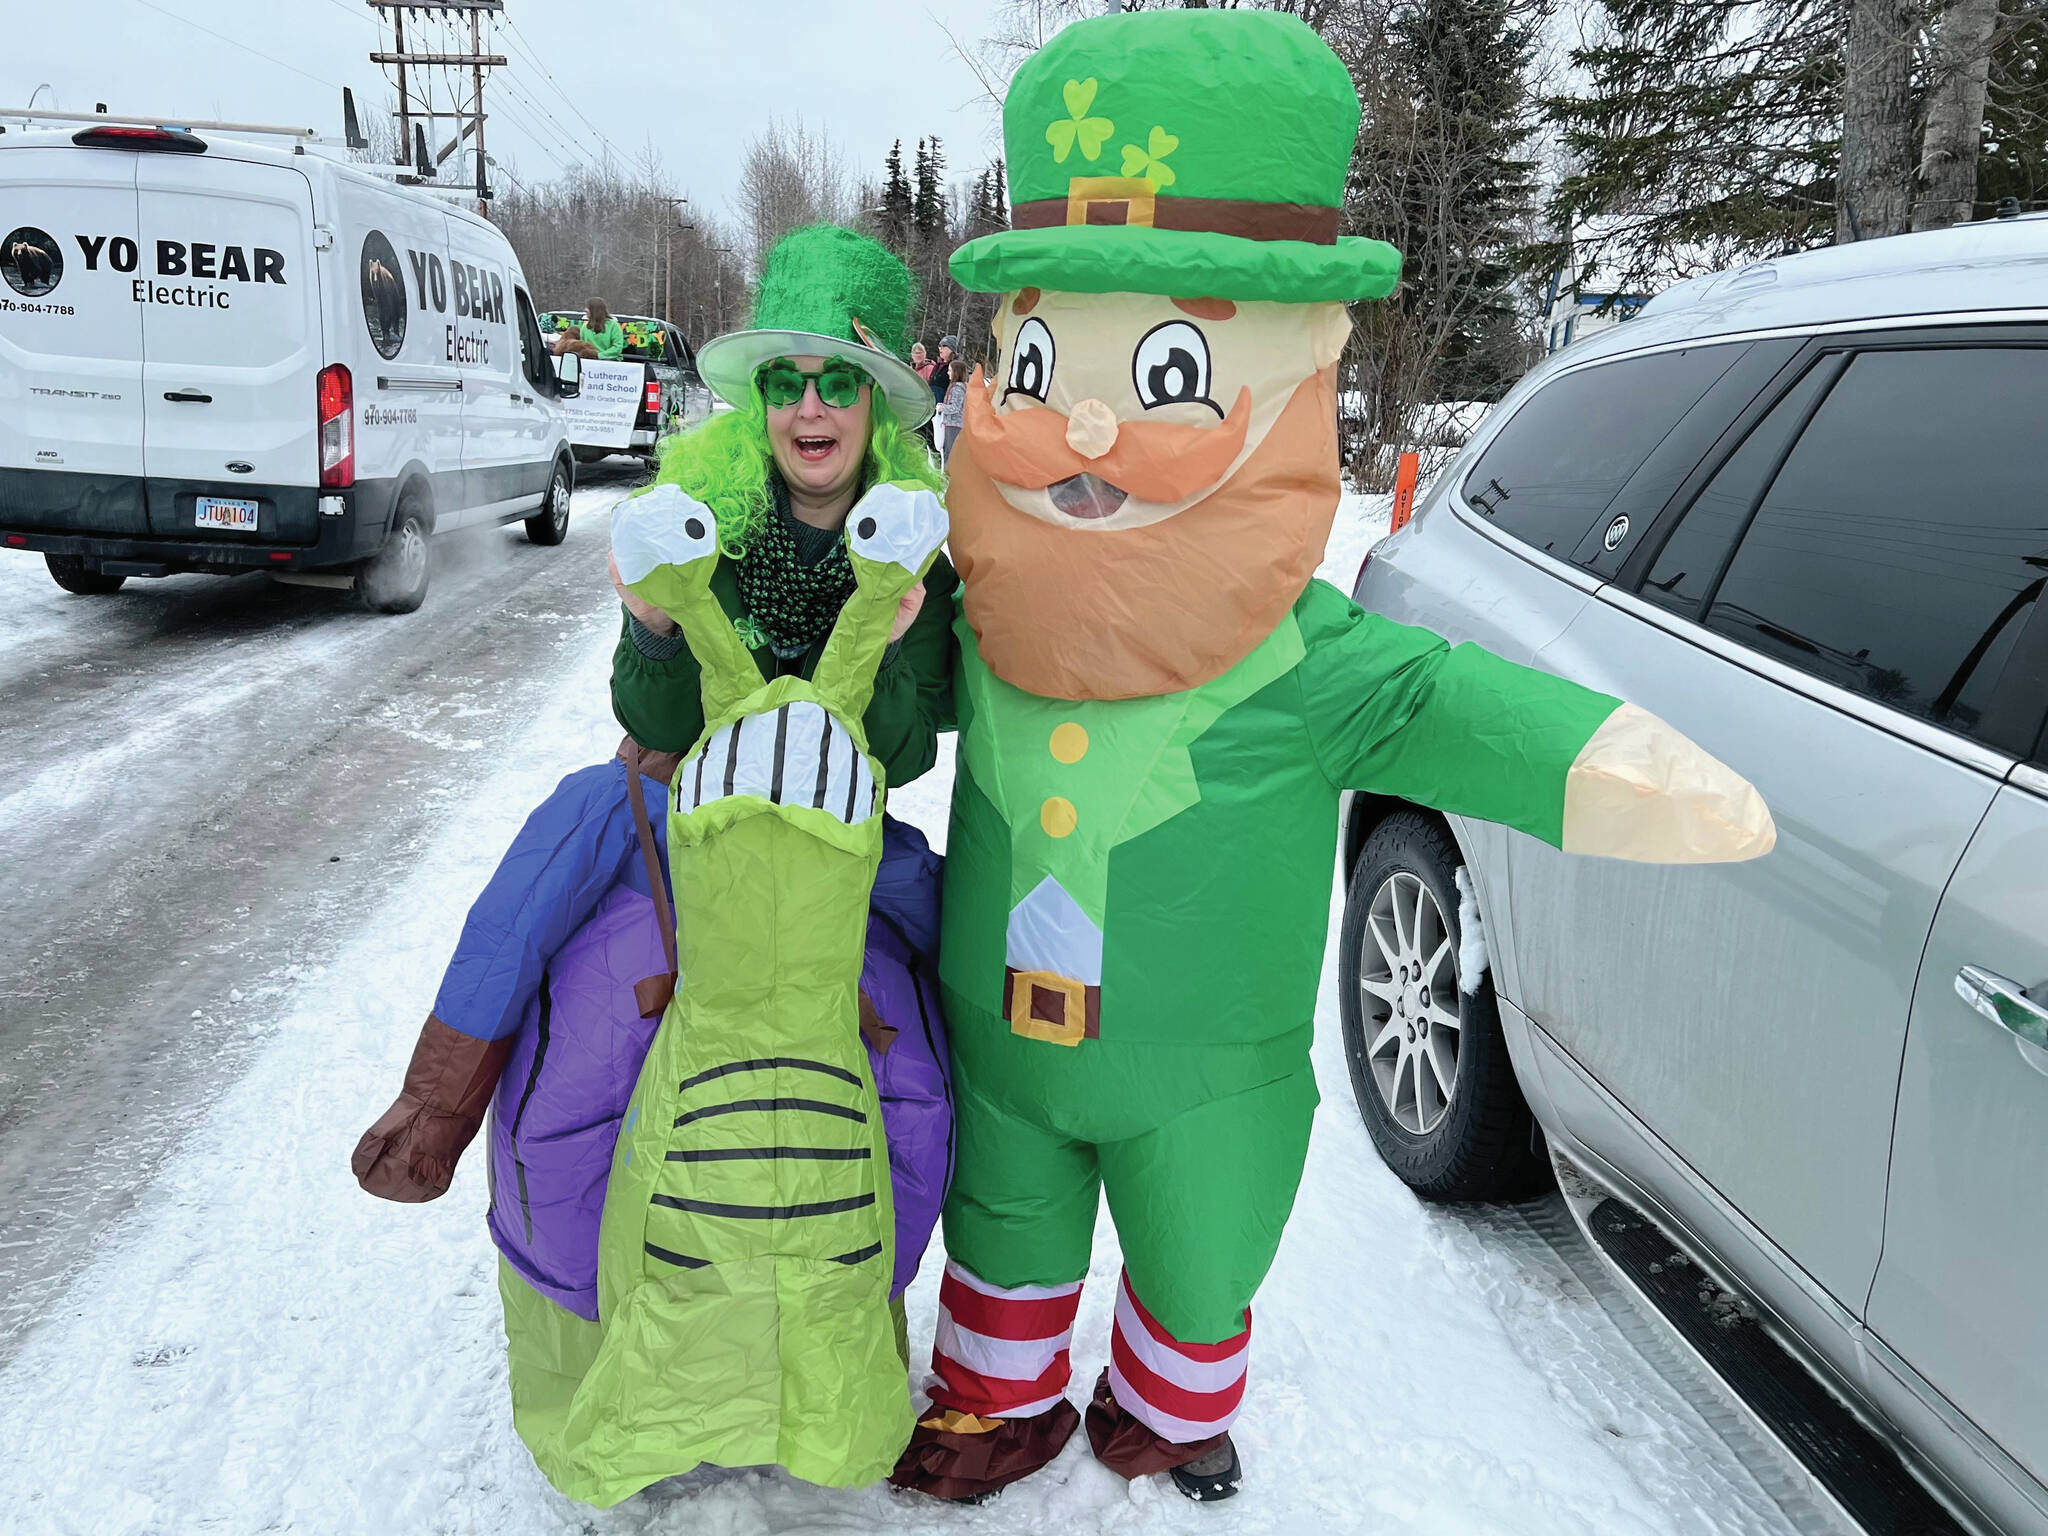 Photo provided by Sara Hondel
Sara Hondel stands with a leprechaun during Sweeney’s St. Patrick’s Day Parade in Soldotna on Sunday. Green, leprechauns and Nugget the Moose poured down the streets for the 34th annual parade hosted by the Soldotna Chamber of Commerce. Under cloudy skies — but fortunately no precipitation — a procession of viridescent celebrants representing businesses and organizations brought festivities to an array of attendees lining the Redoubt Avenue.